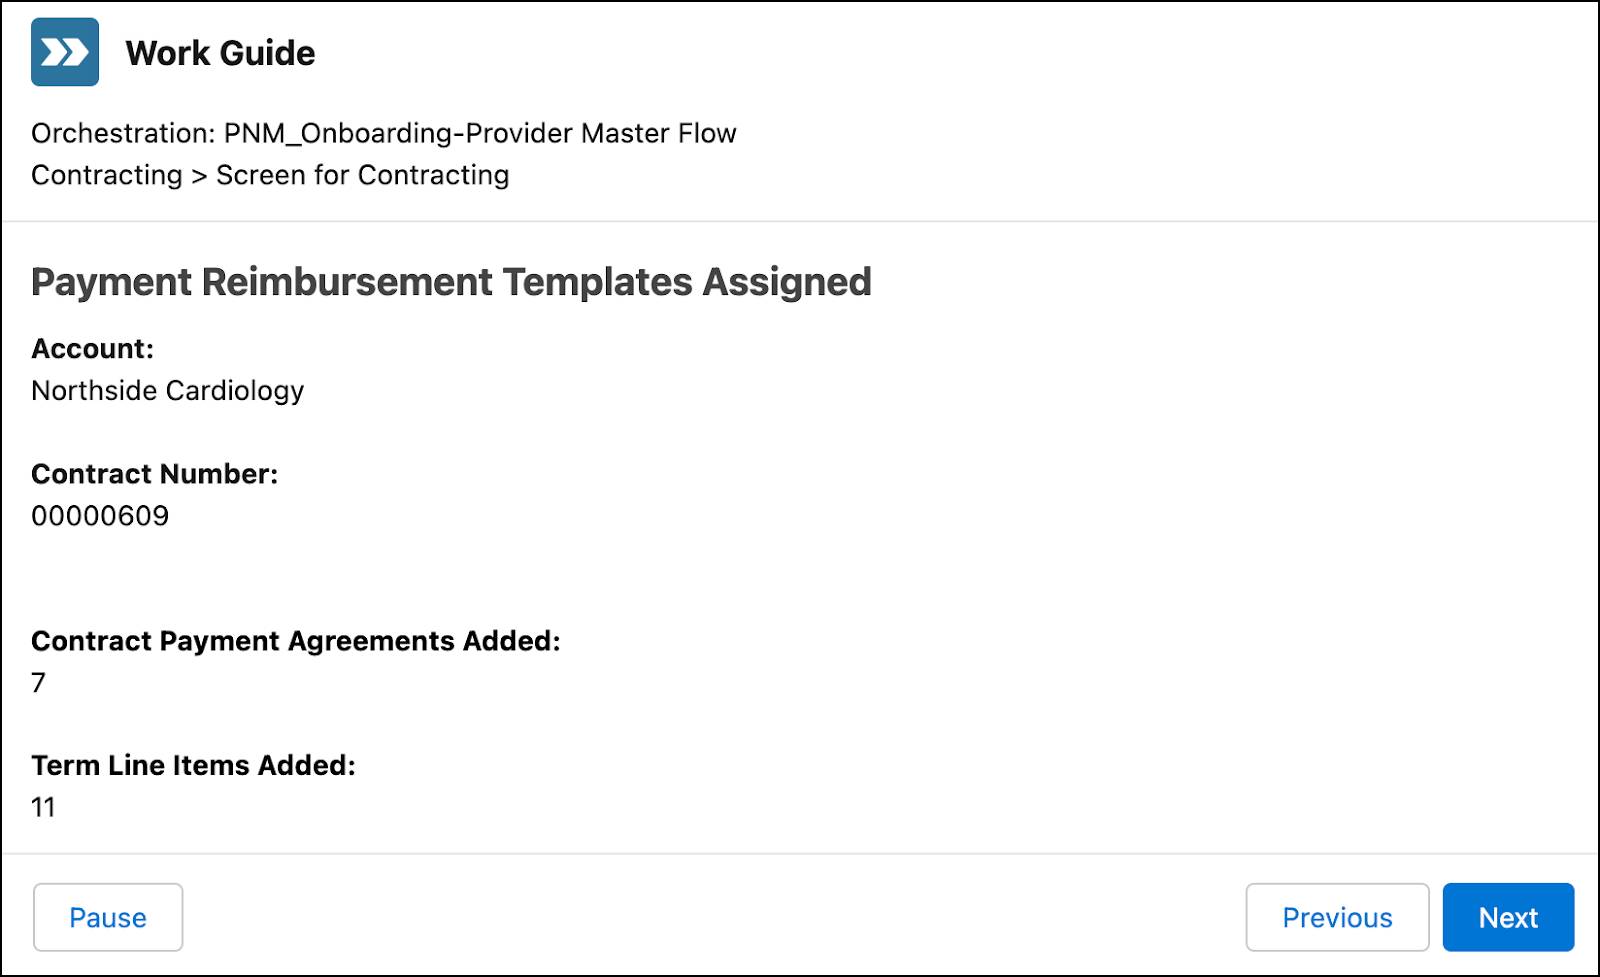 Work guide showing Contract Payment Agreements and Term Lines added to Dr. Zamadi’s contract.